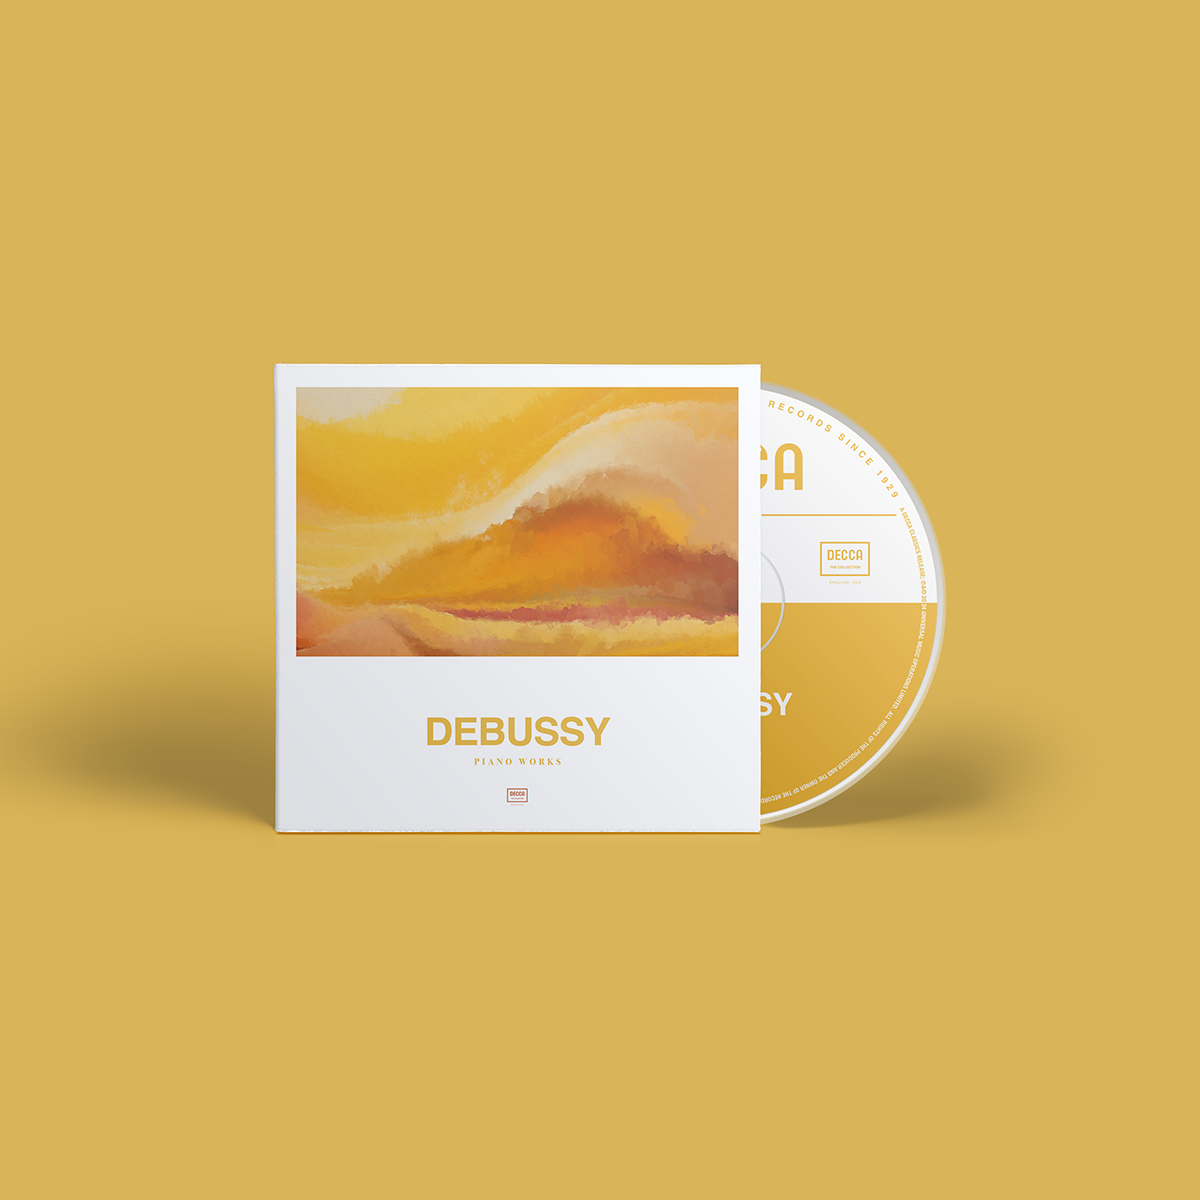 Claude Debussy - Debussy - The Piano Works: CD